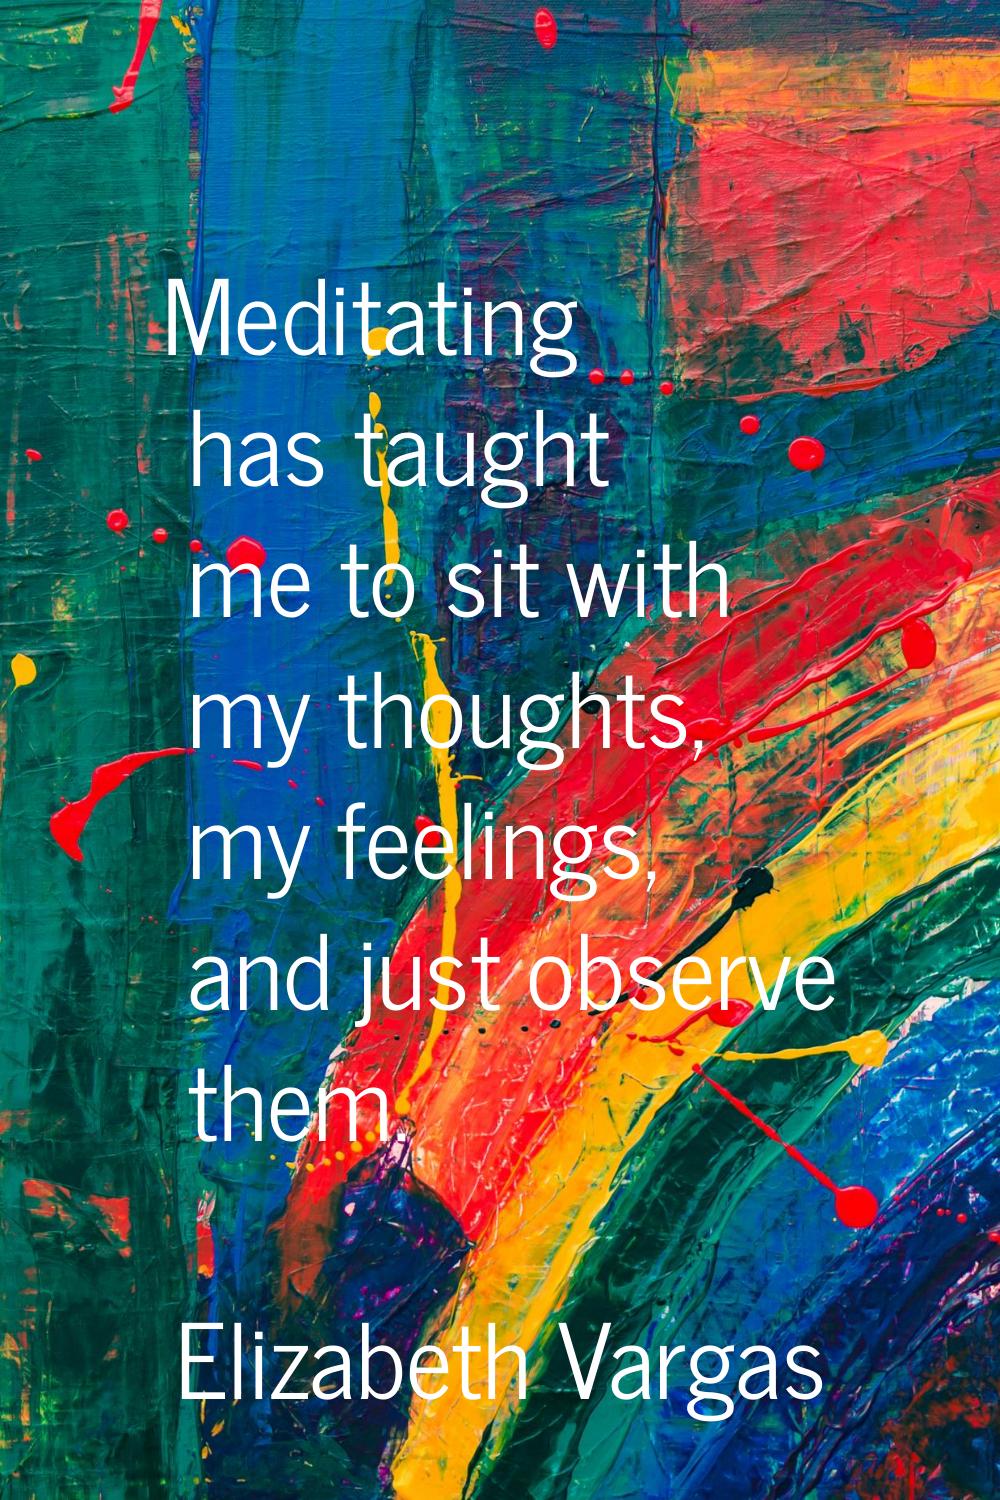 Meditating has taught me to sit with my thoughts, my feelings, and just observe them.